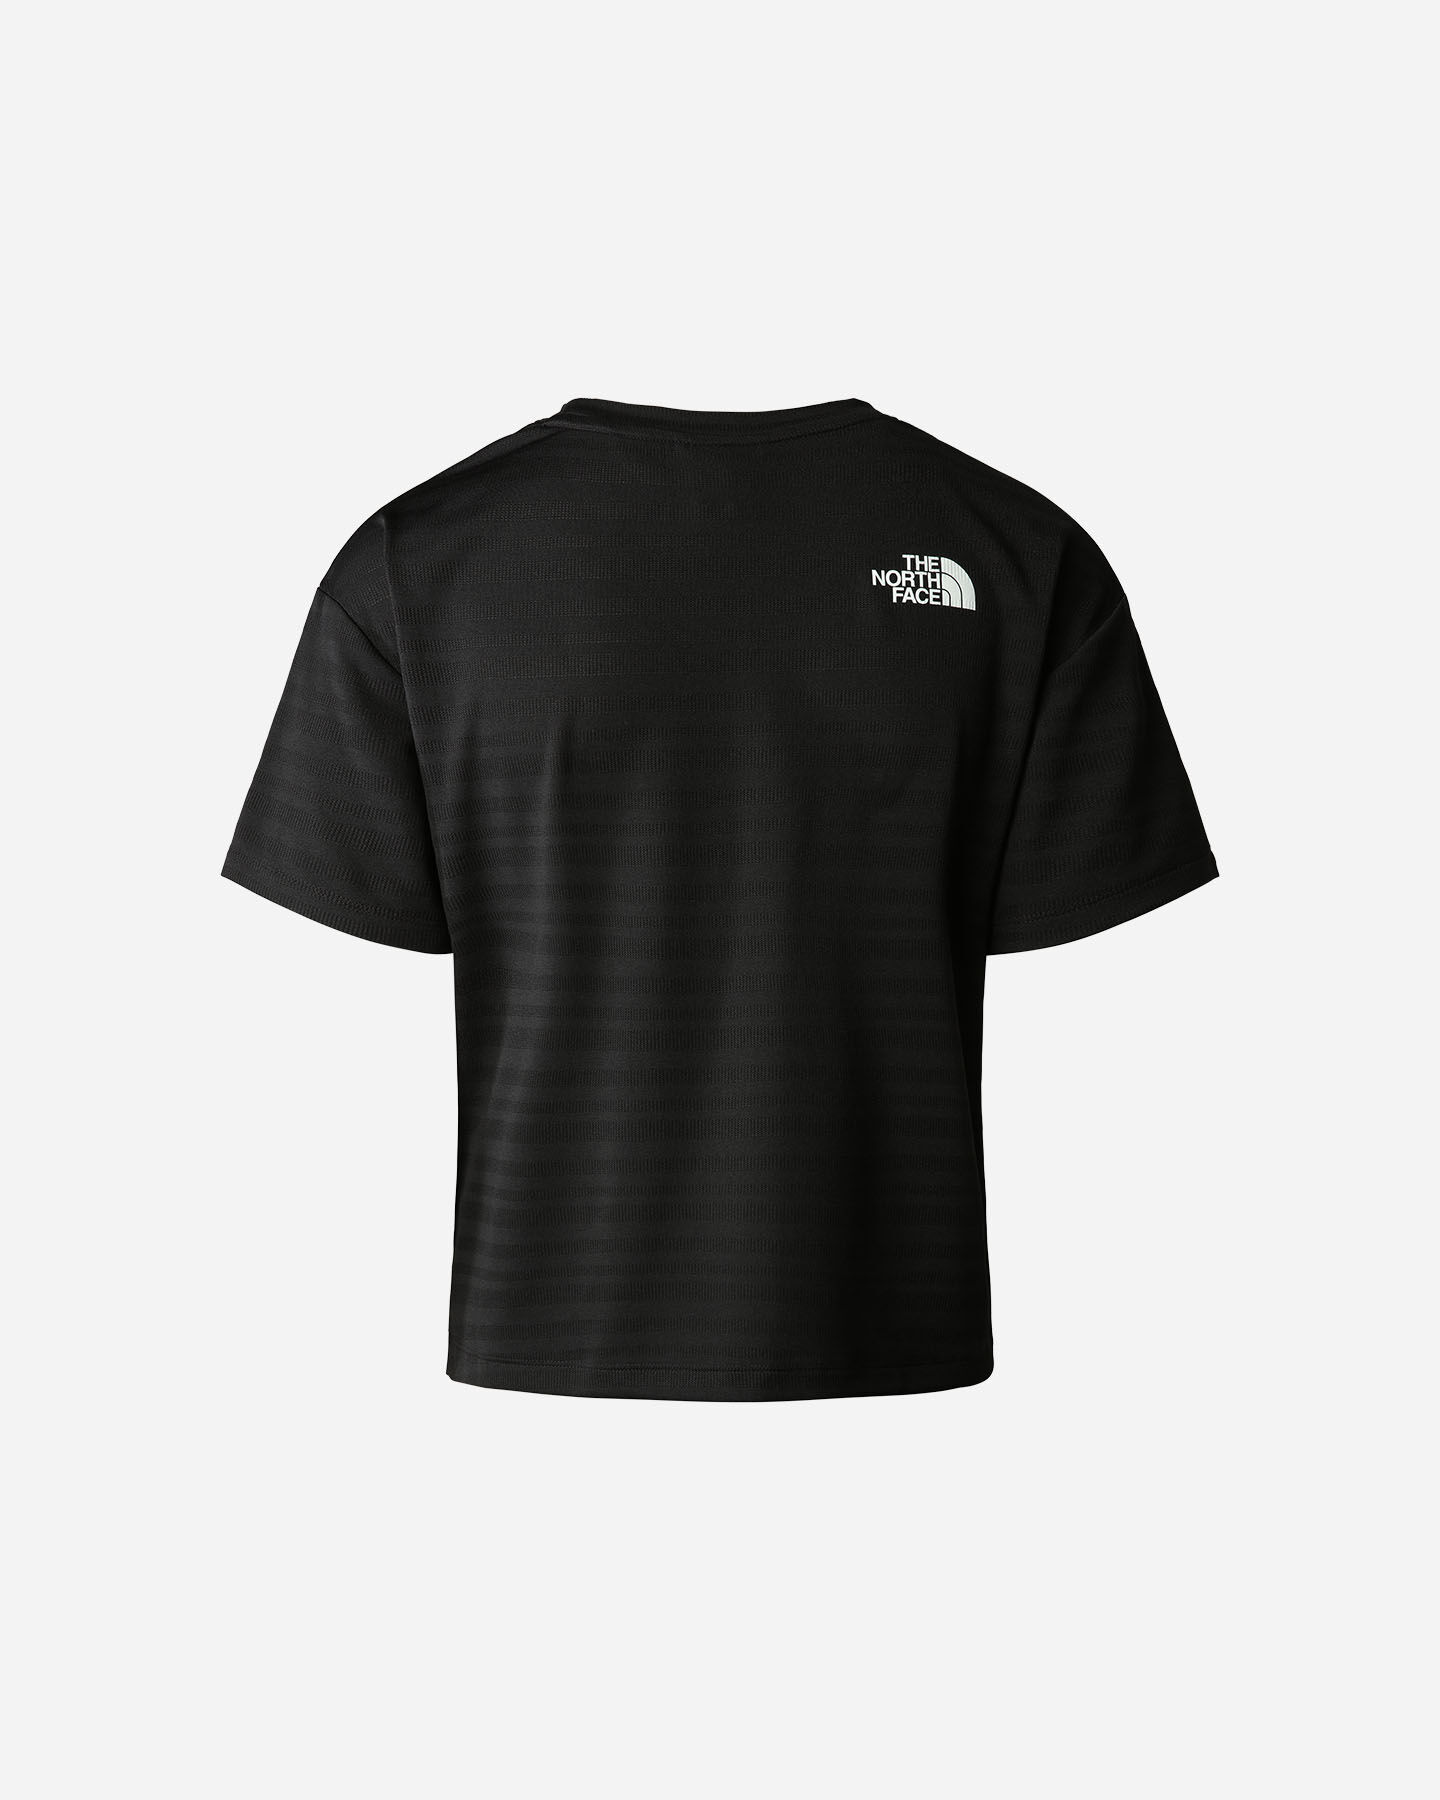  T-Shirt THE NORTH FACE MOUNTAIN ATHLETICS W S5537060|JK3|L scatto 1